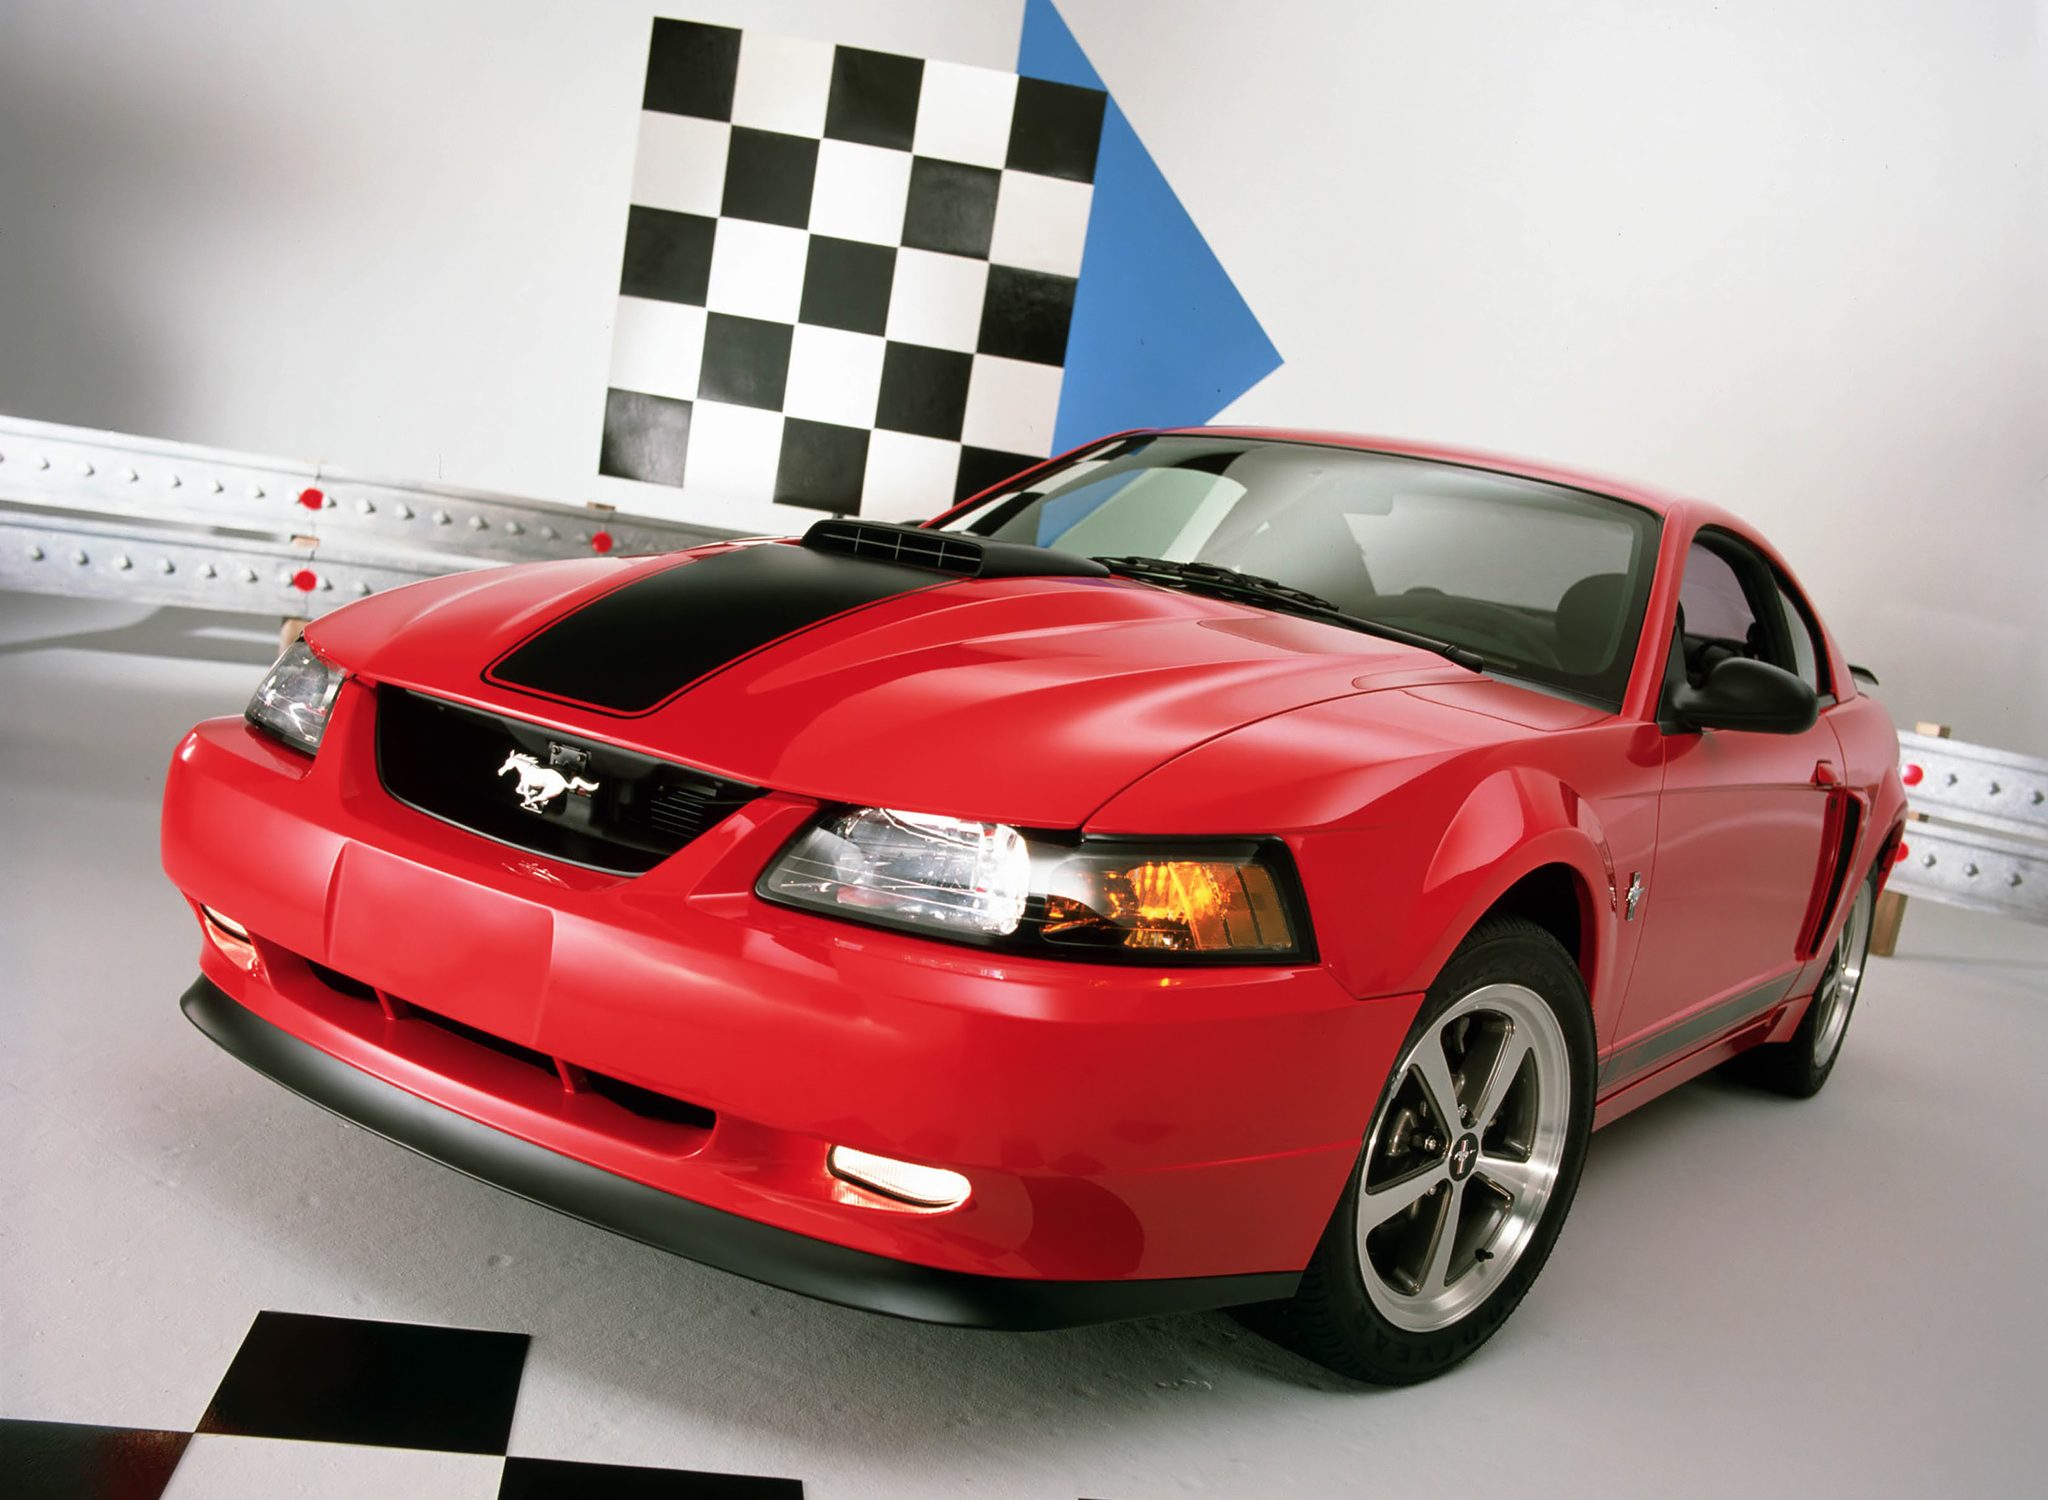 Mustang Of The Day: 2003 Ford Mustang Mach 1